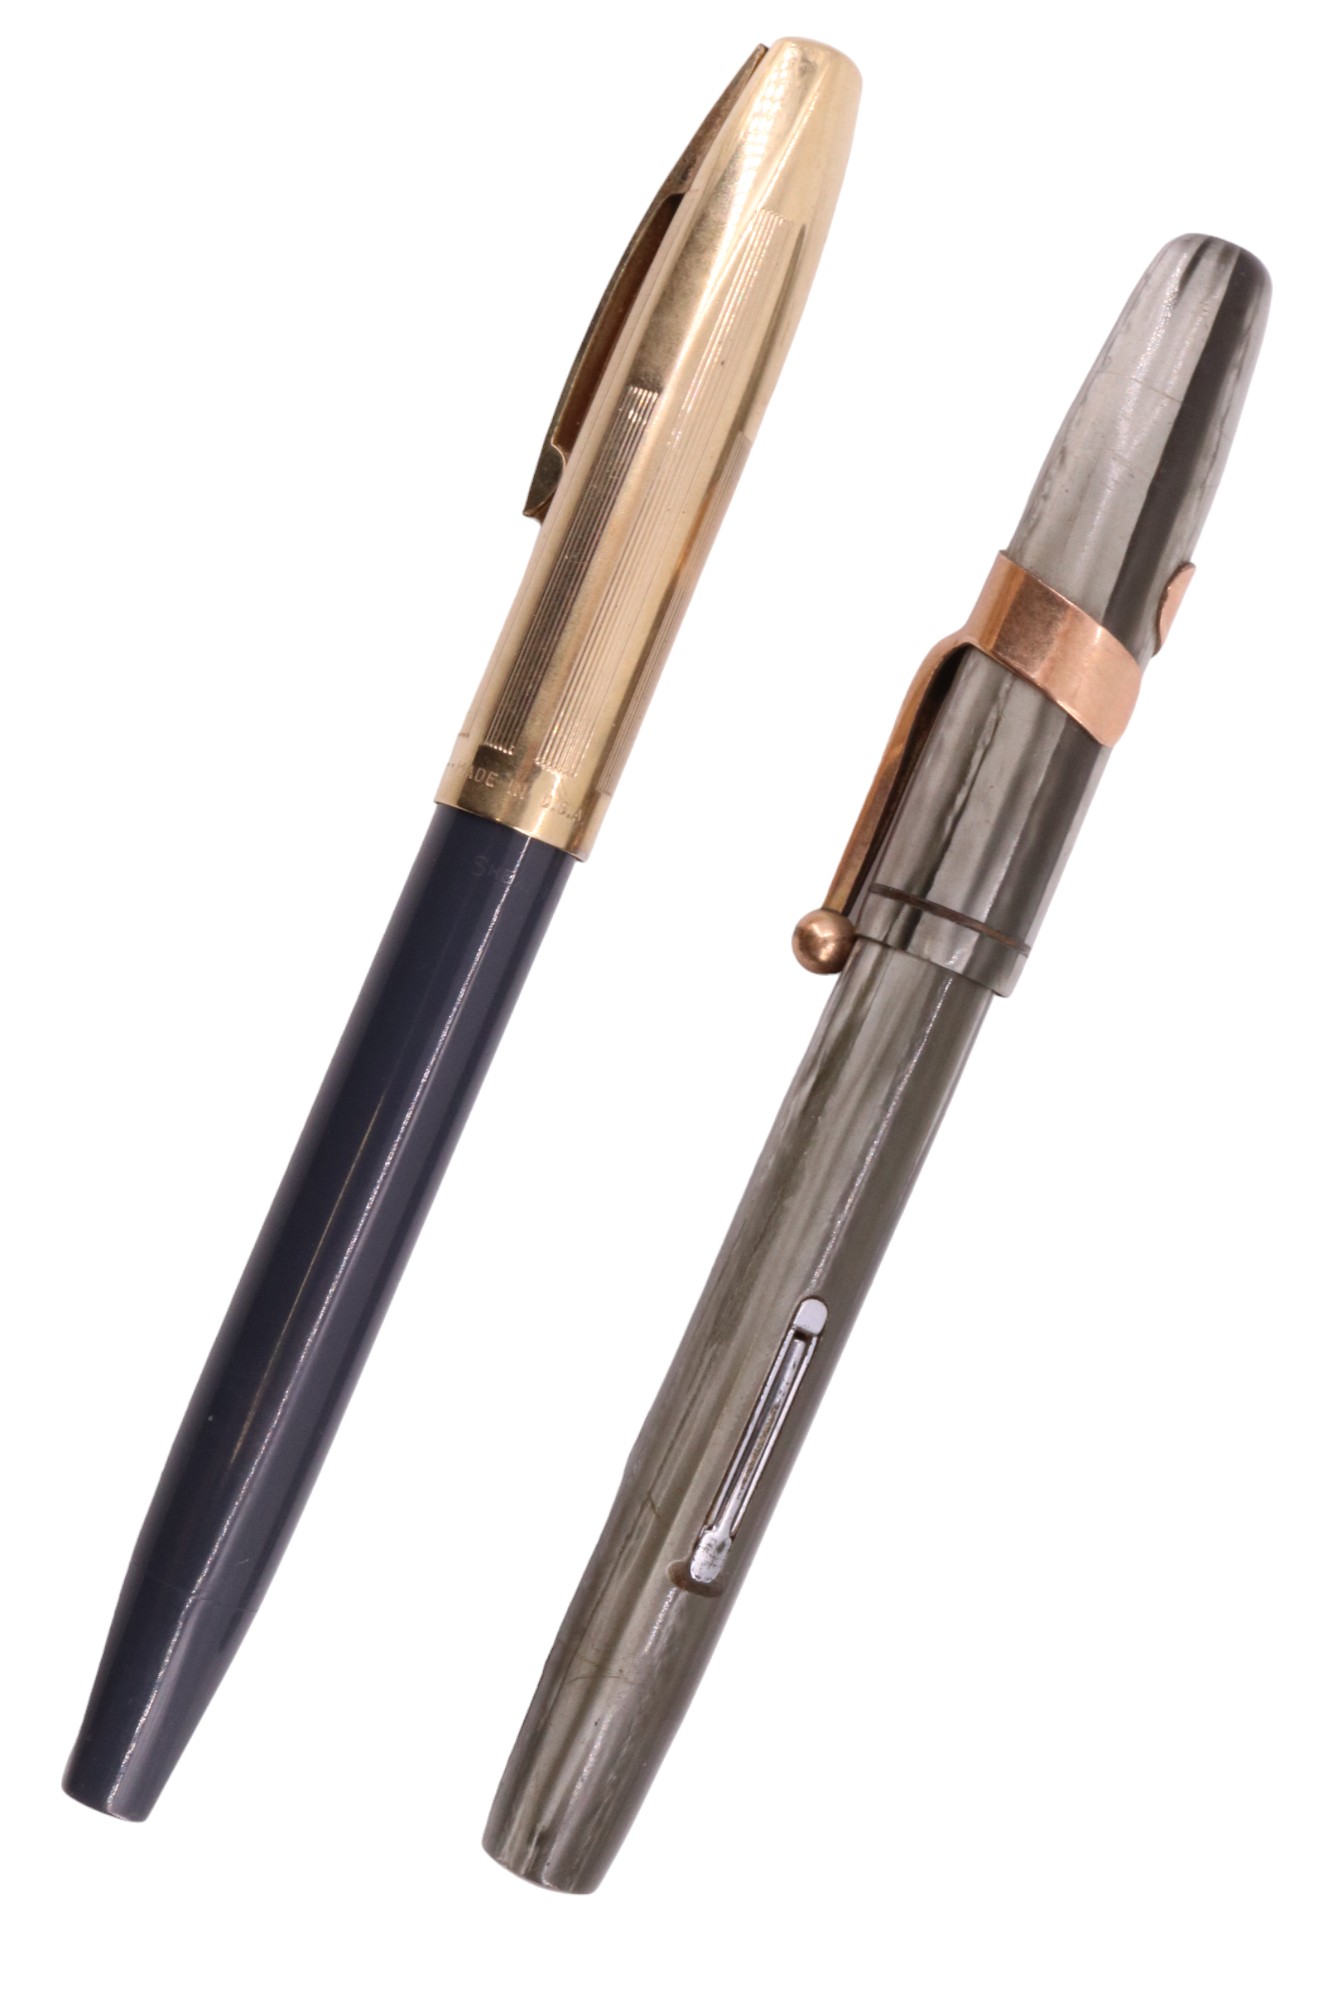 A vintage Sheaffer fountain pen with a 14 K nib, together with a similar Waterman's fountain pen